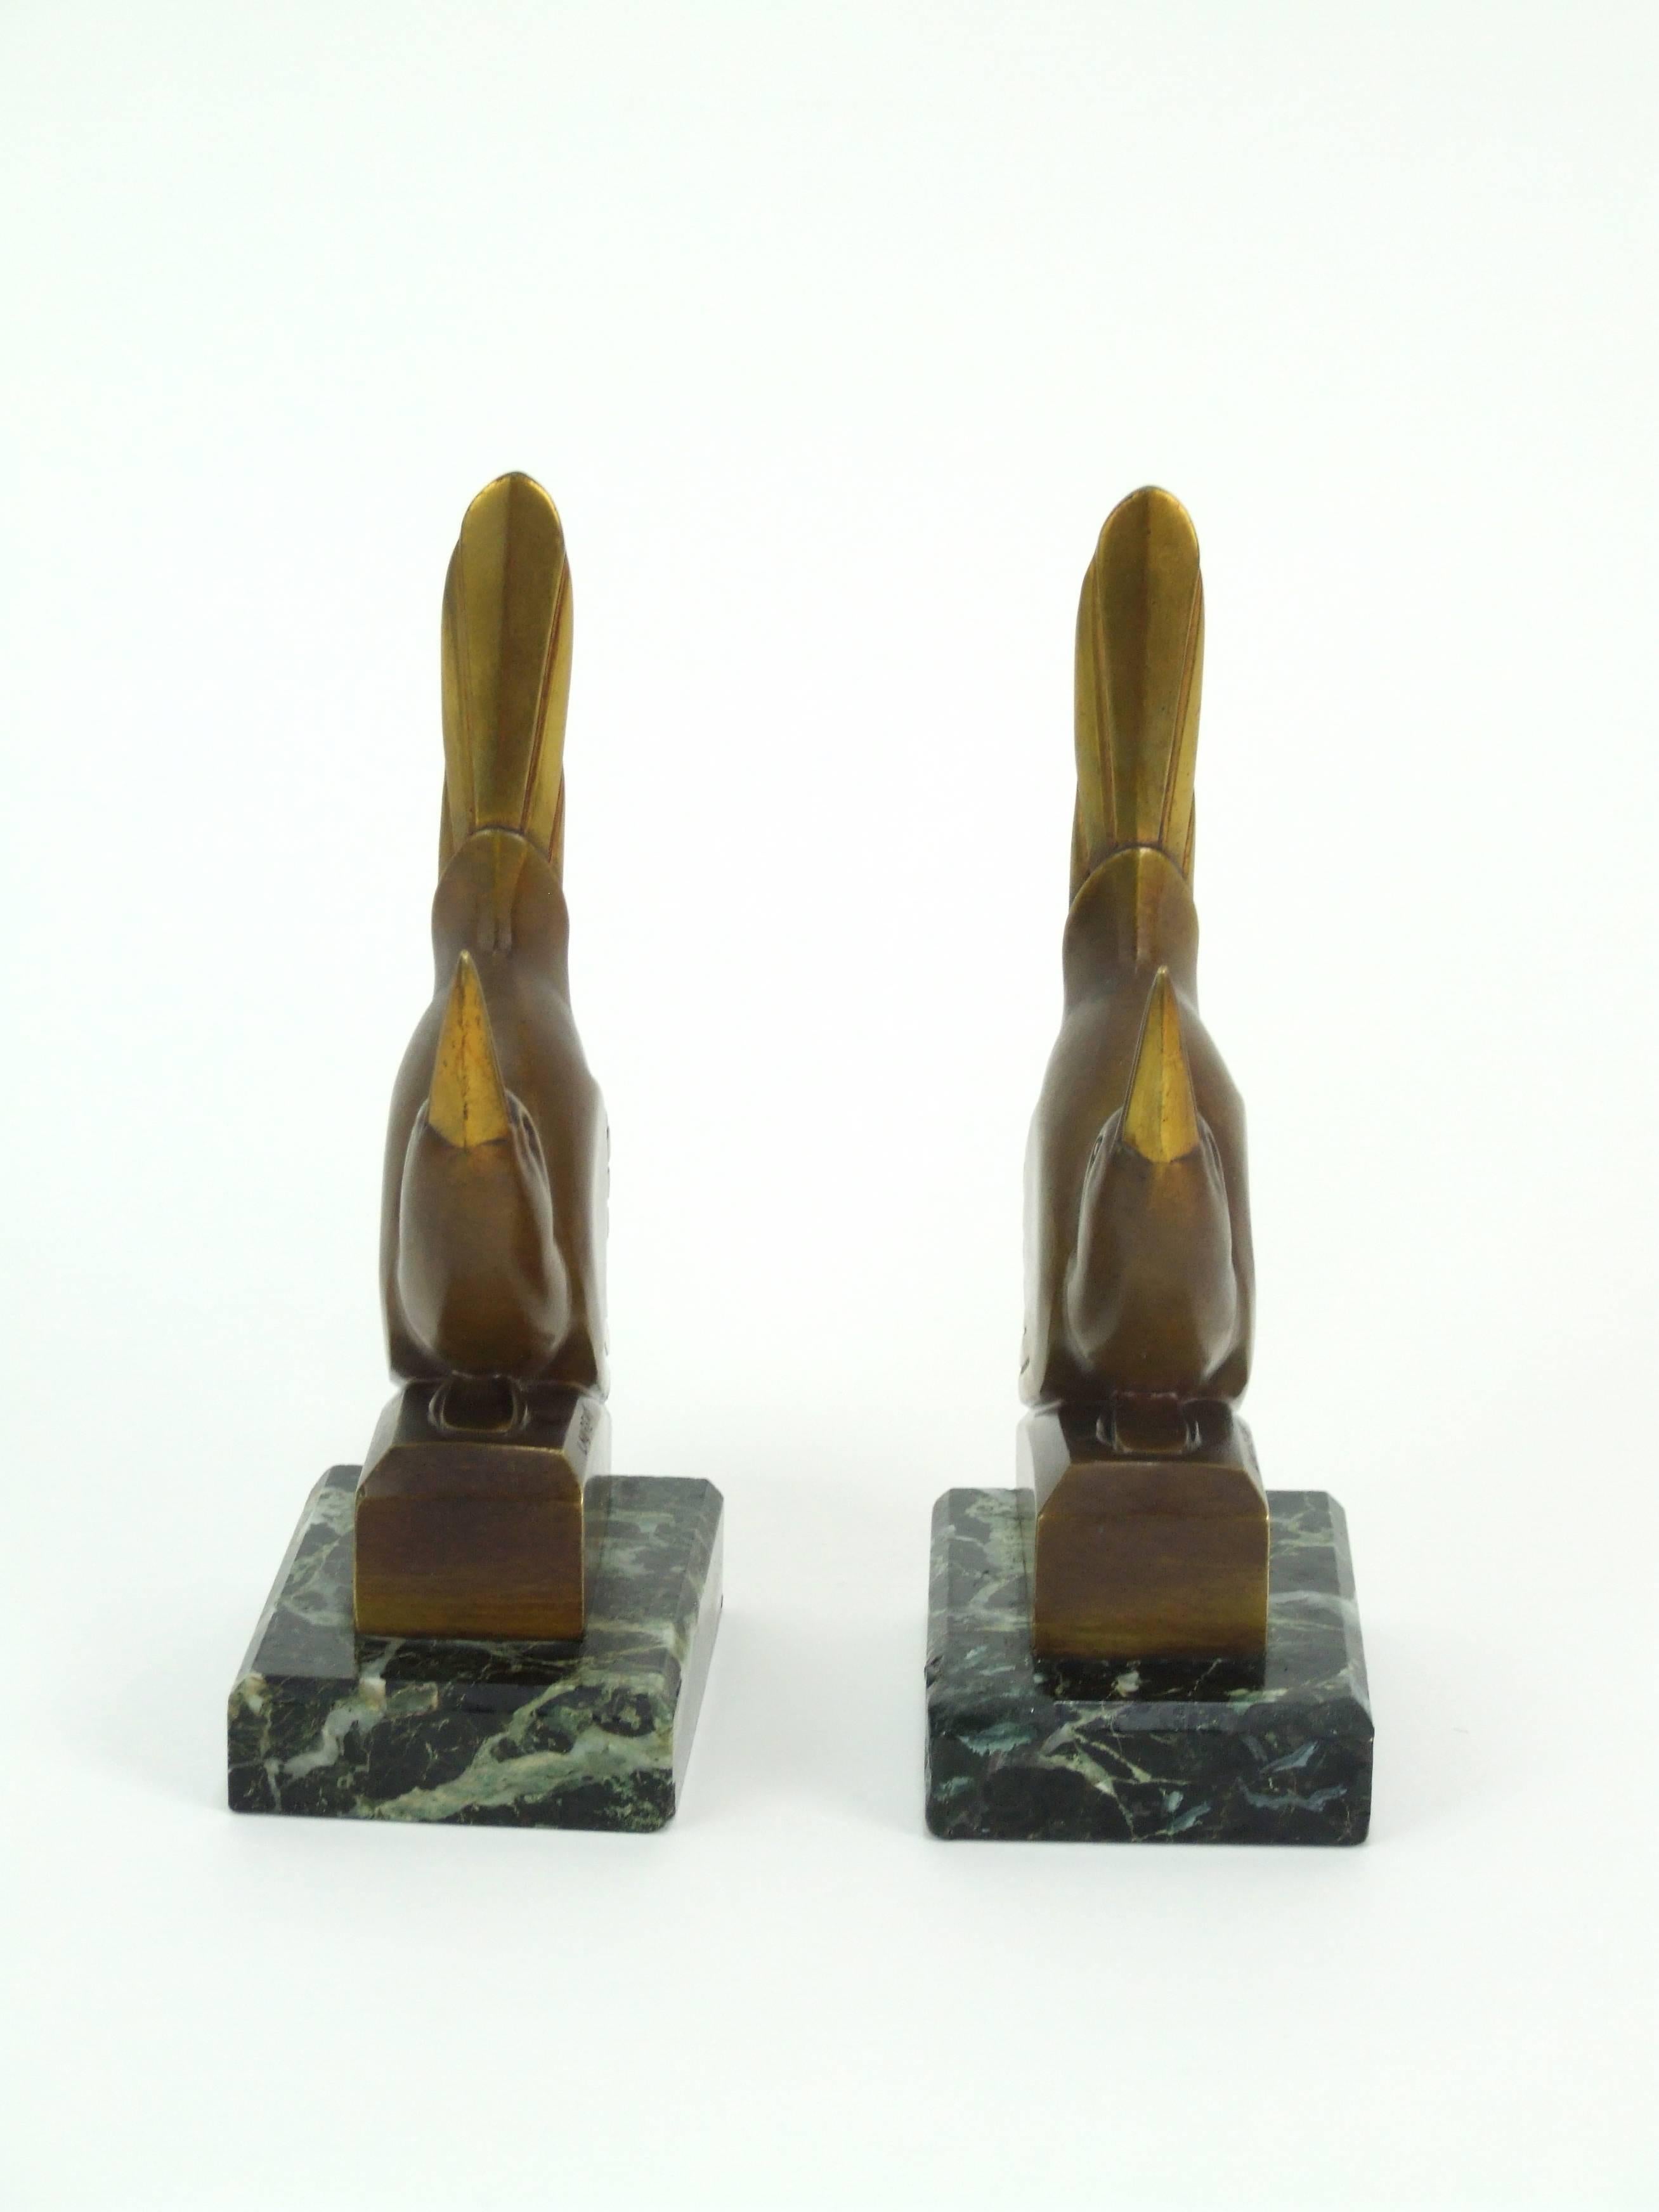 French Art Deco bronze stylised bird bookends by Laurent. Signed to the base and stamped with the Etling foundry mark. They each measure 7 inches high by 3 inches wide by 2.5 inches deep (17.5 cm x 7.5 cm x 6.5 cm). In good condition with some old